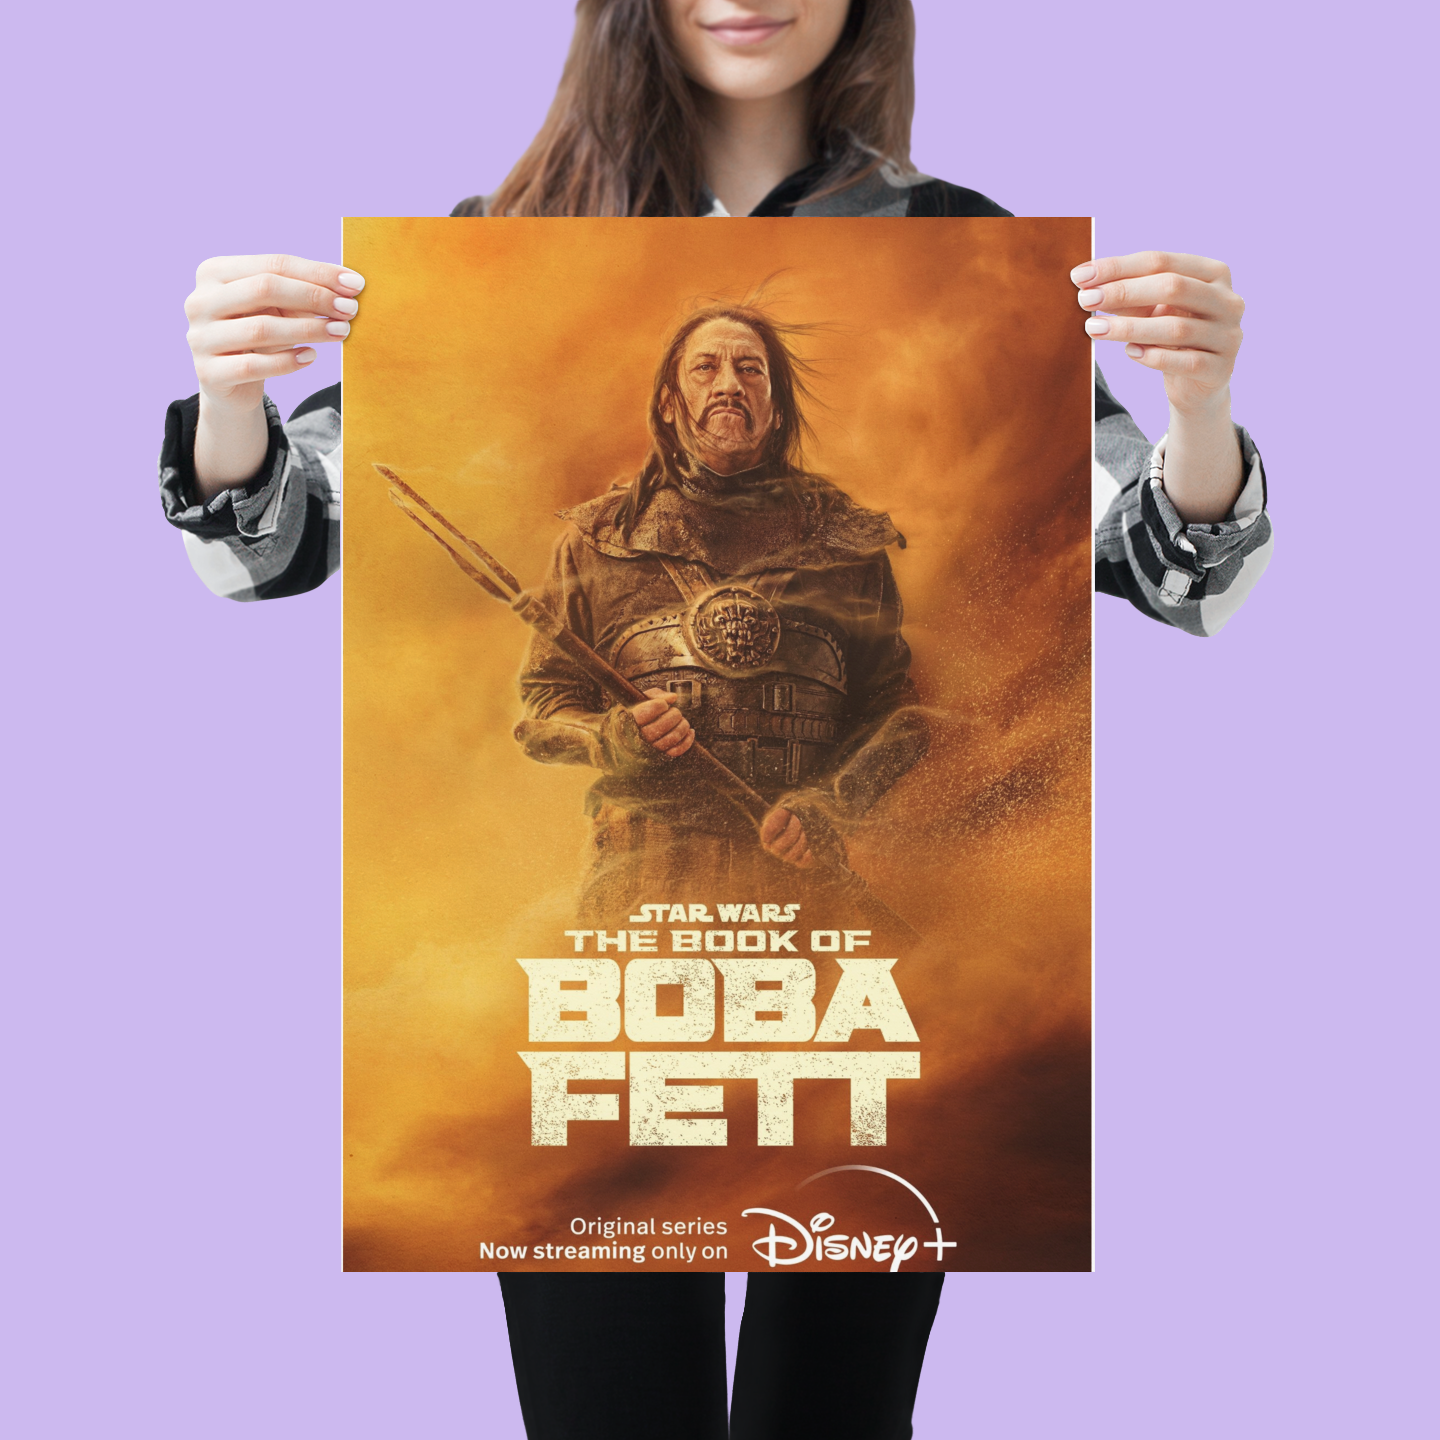 Trejo, Poster Lost (Danny Show Star Of Book Rancor The Keeper) Posters Wars Boba - TV Fett